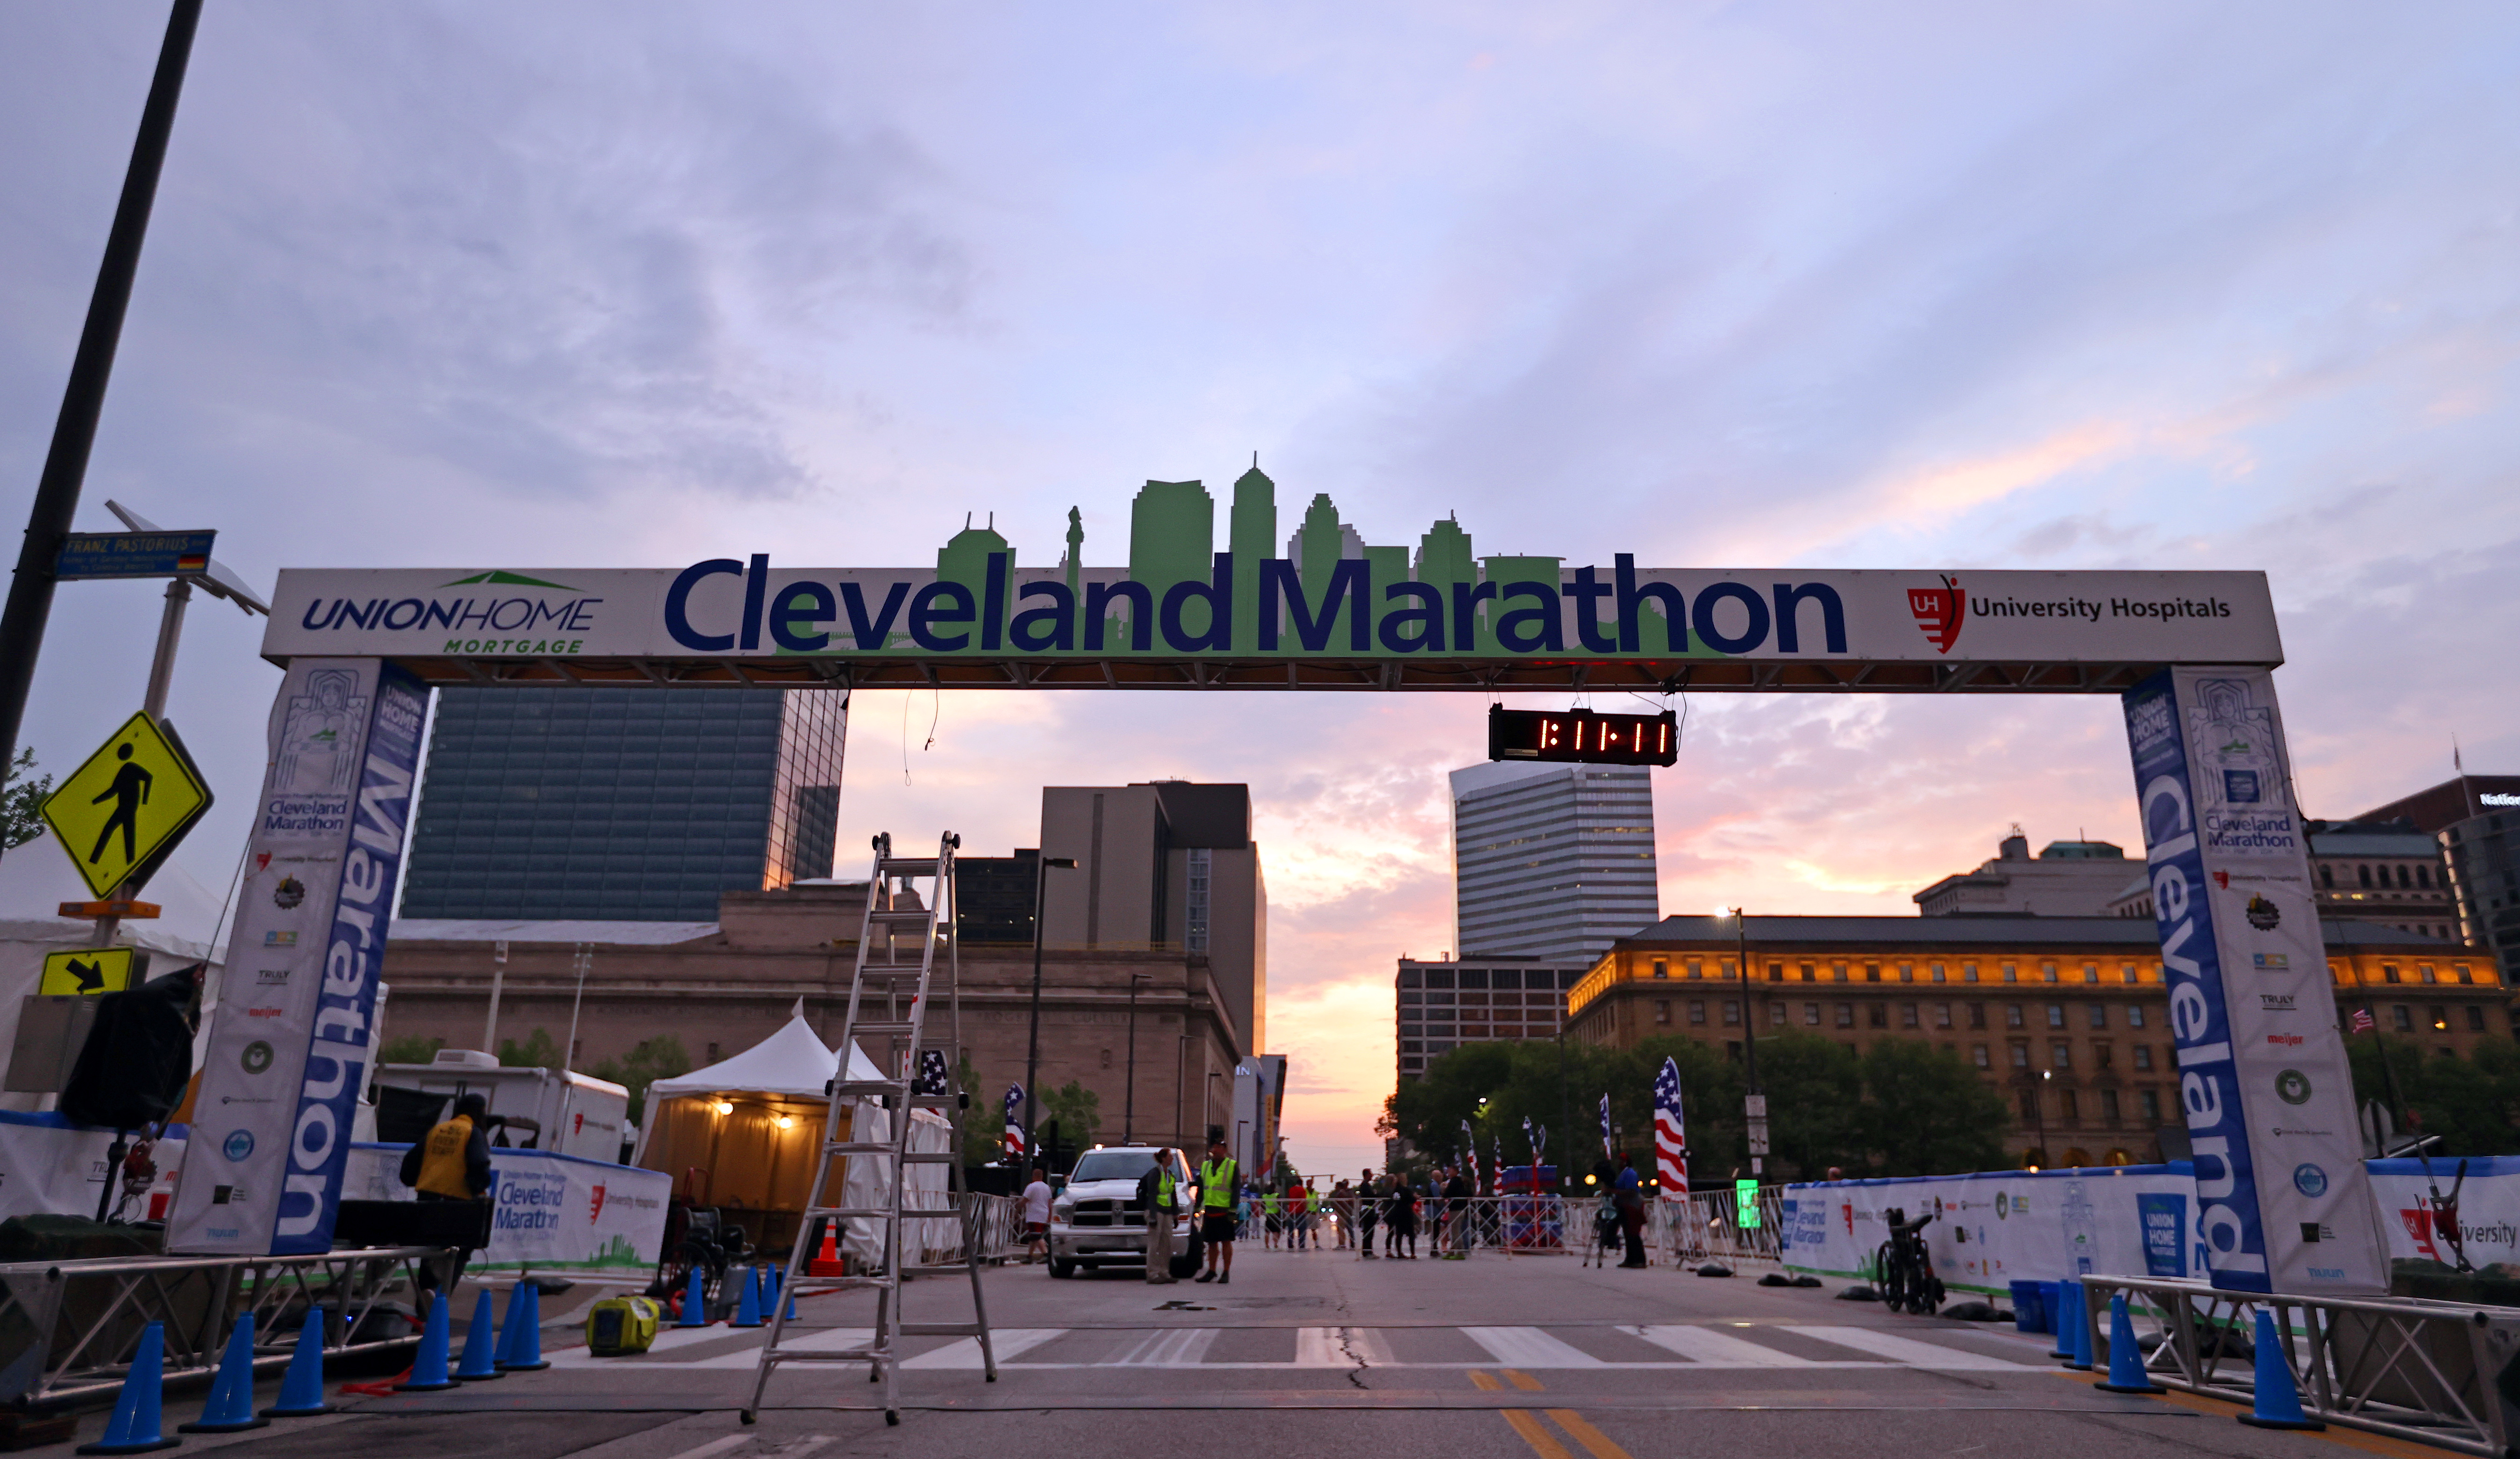 Union Home Mortgage and BibBoards, A Partnership that makes the Cleveland  Marathon feel like Home